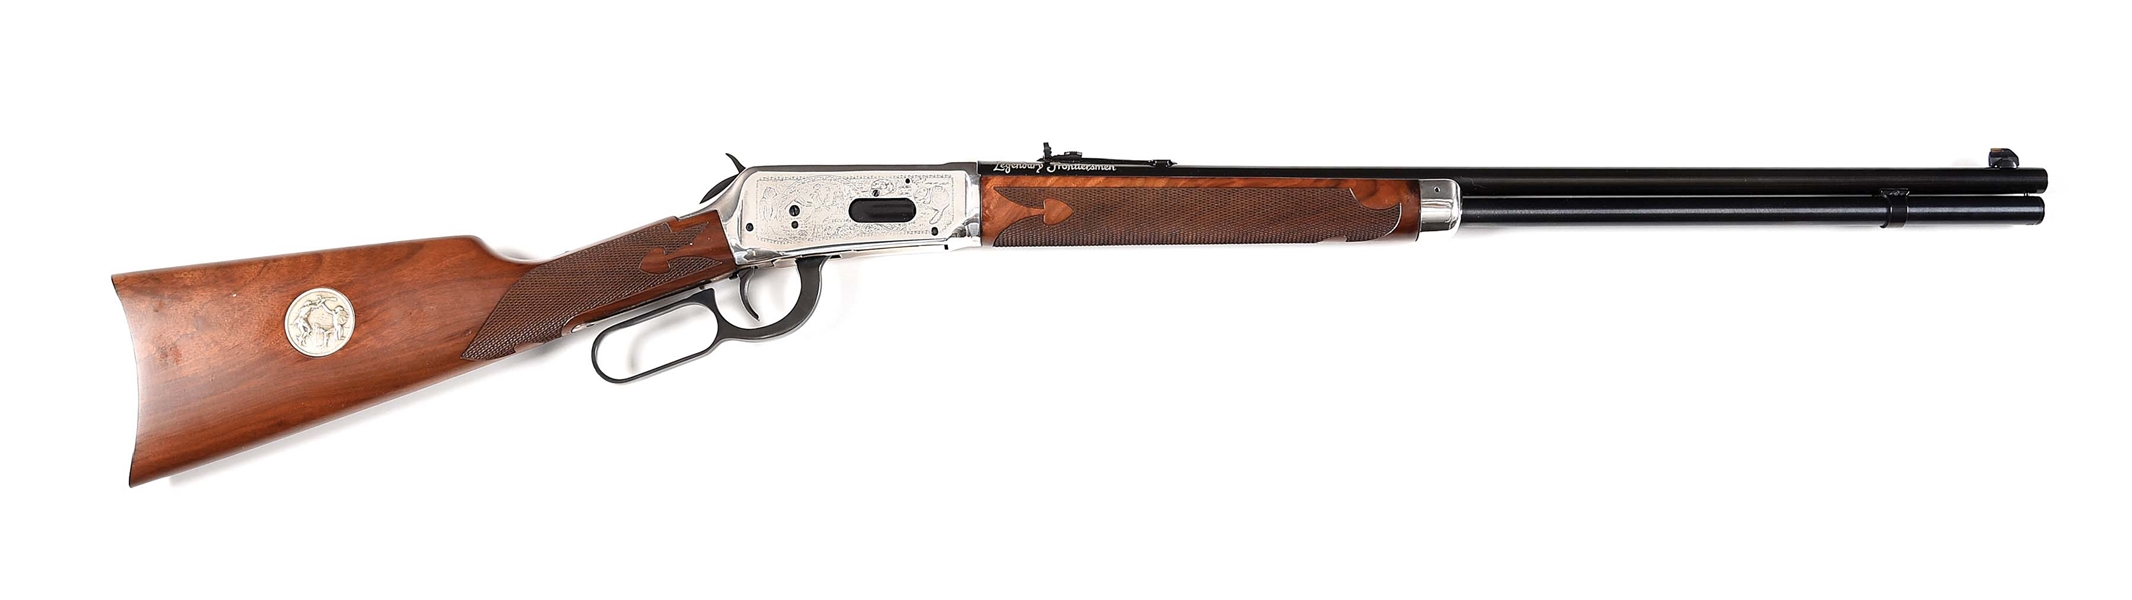 (M) WINCHESTER LEGENDARY FRONTIERSMAN COMMEMORATIVE MODEL 1894 LEVER ACTION RIFLE WITH FACTORY BOX AND MATCHING AMMUNITION.